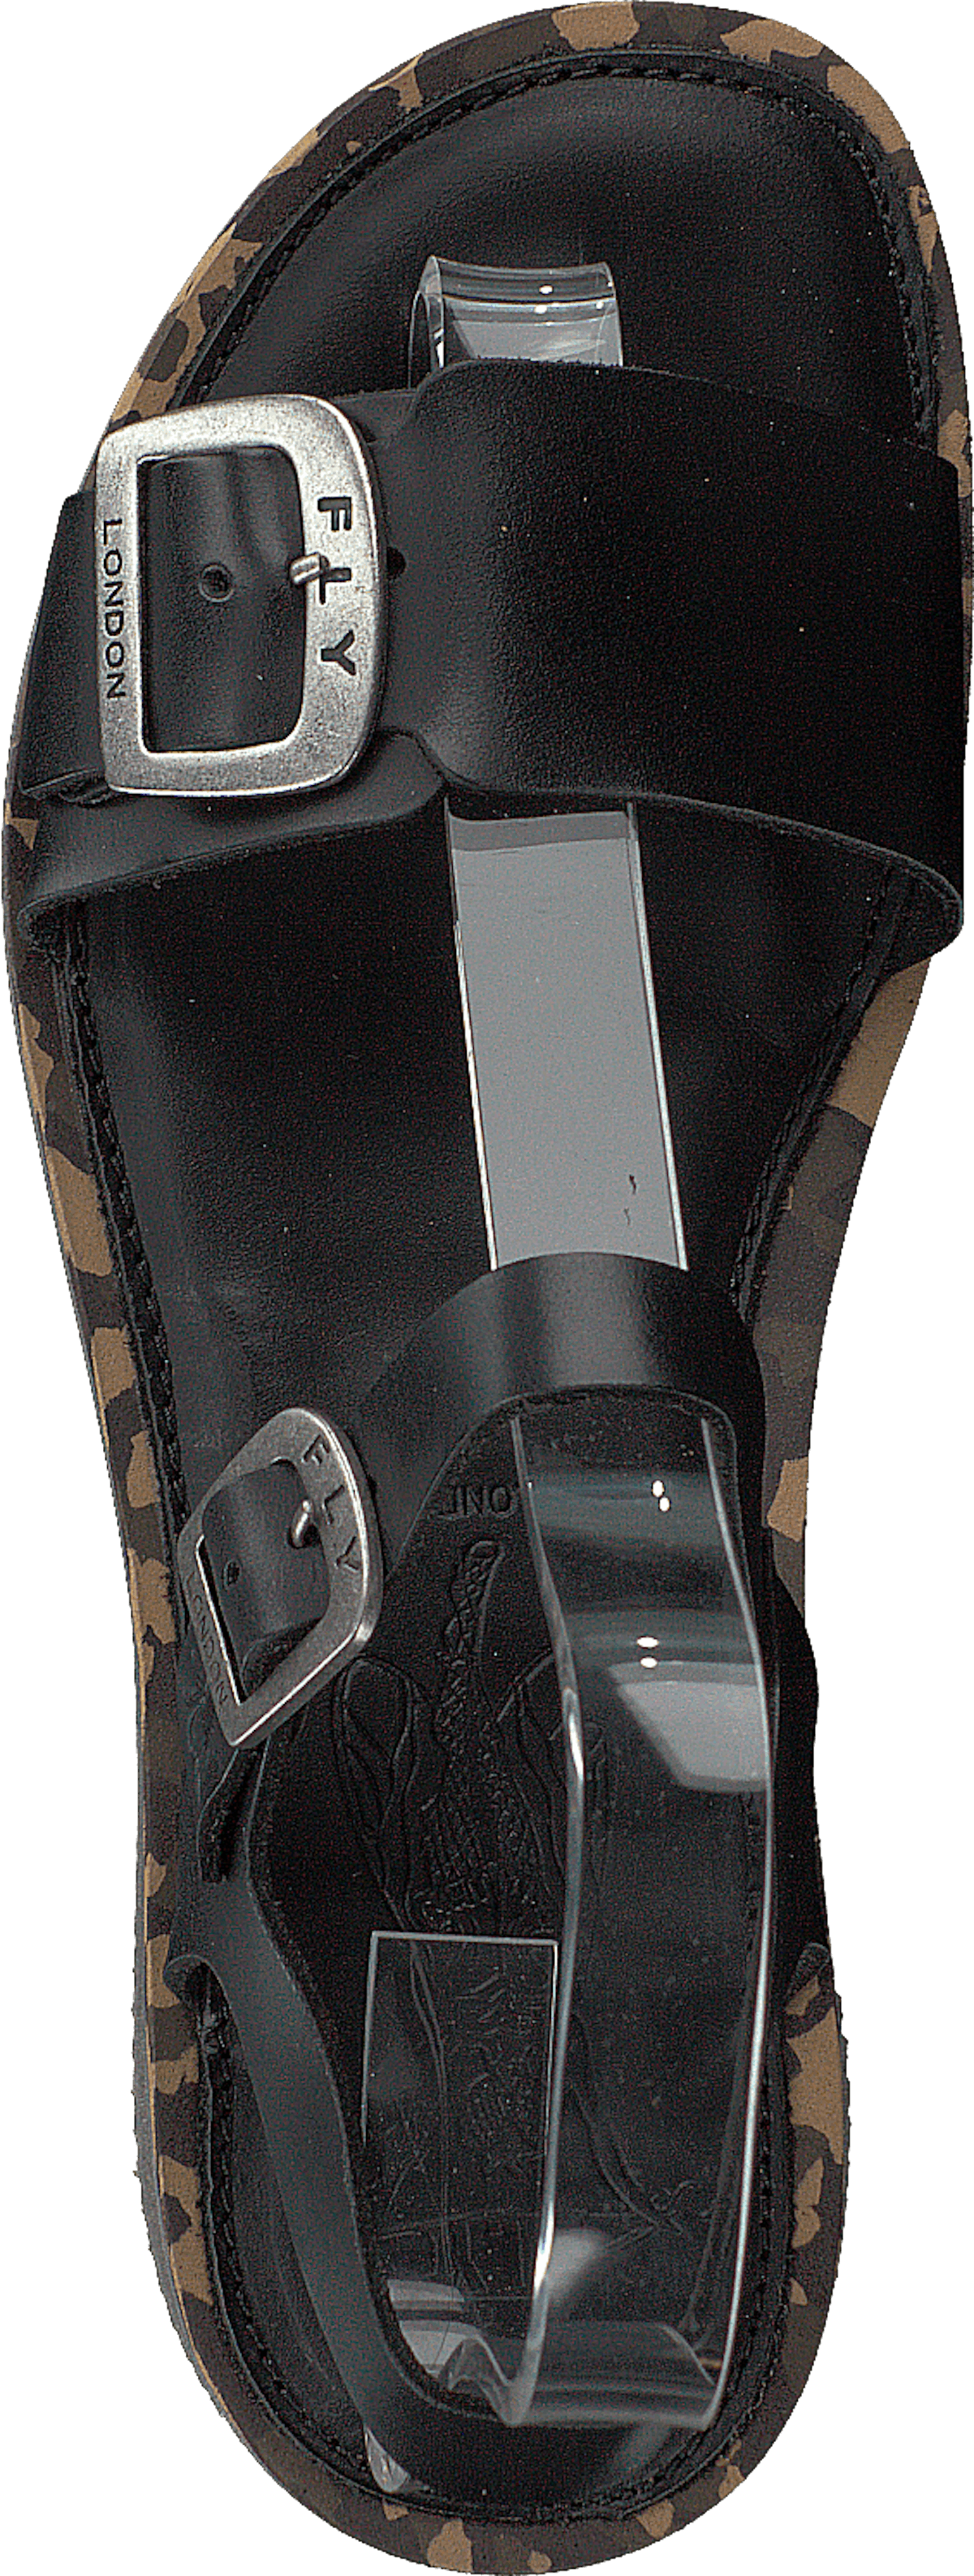 Comb230fly Bridle Black